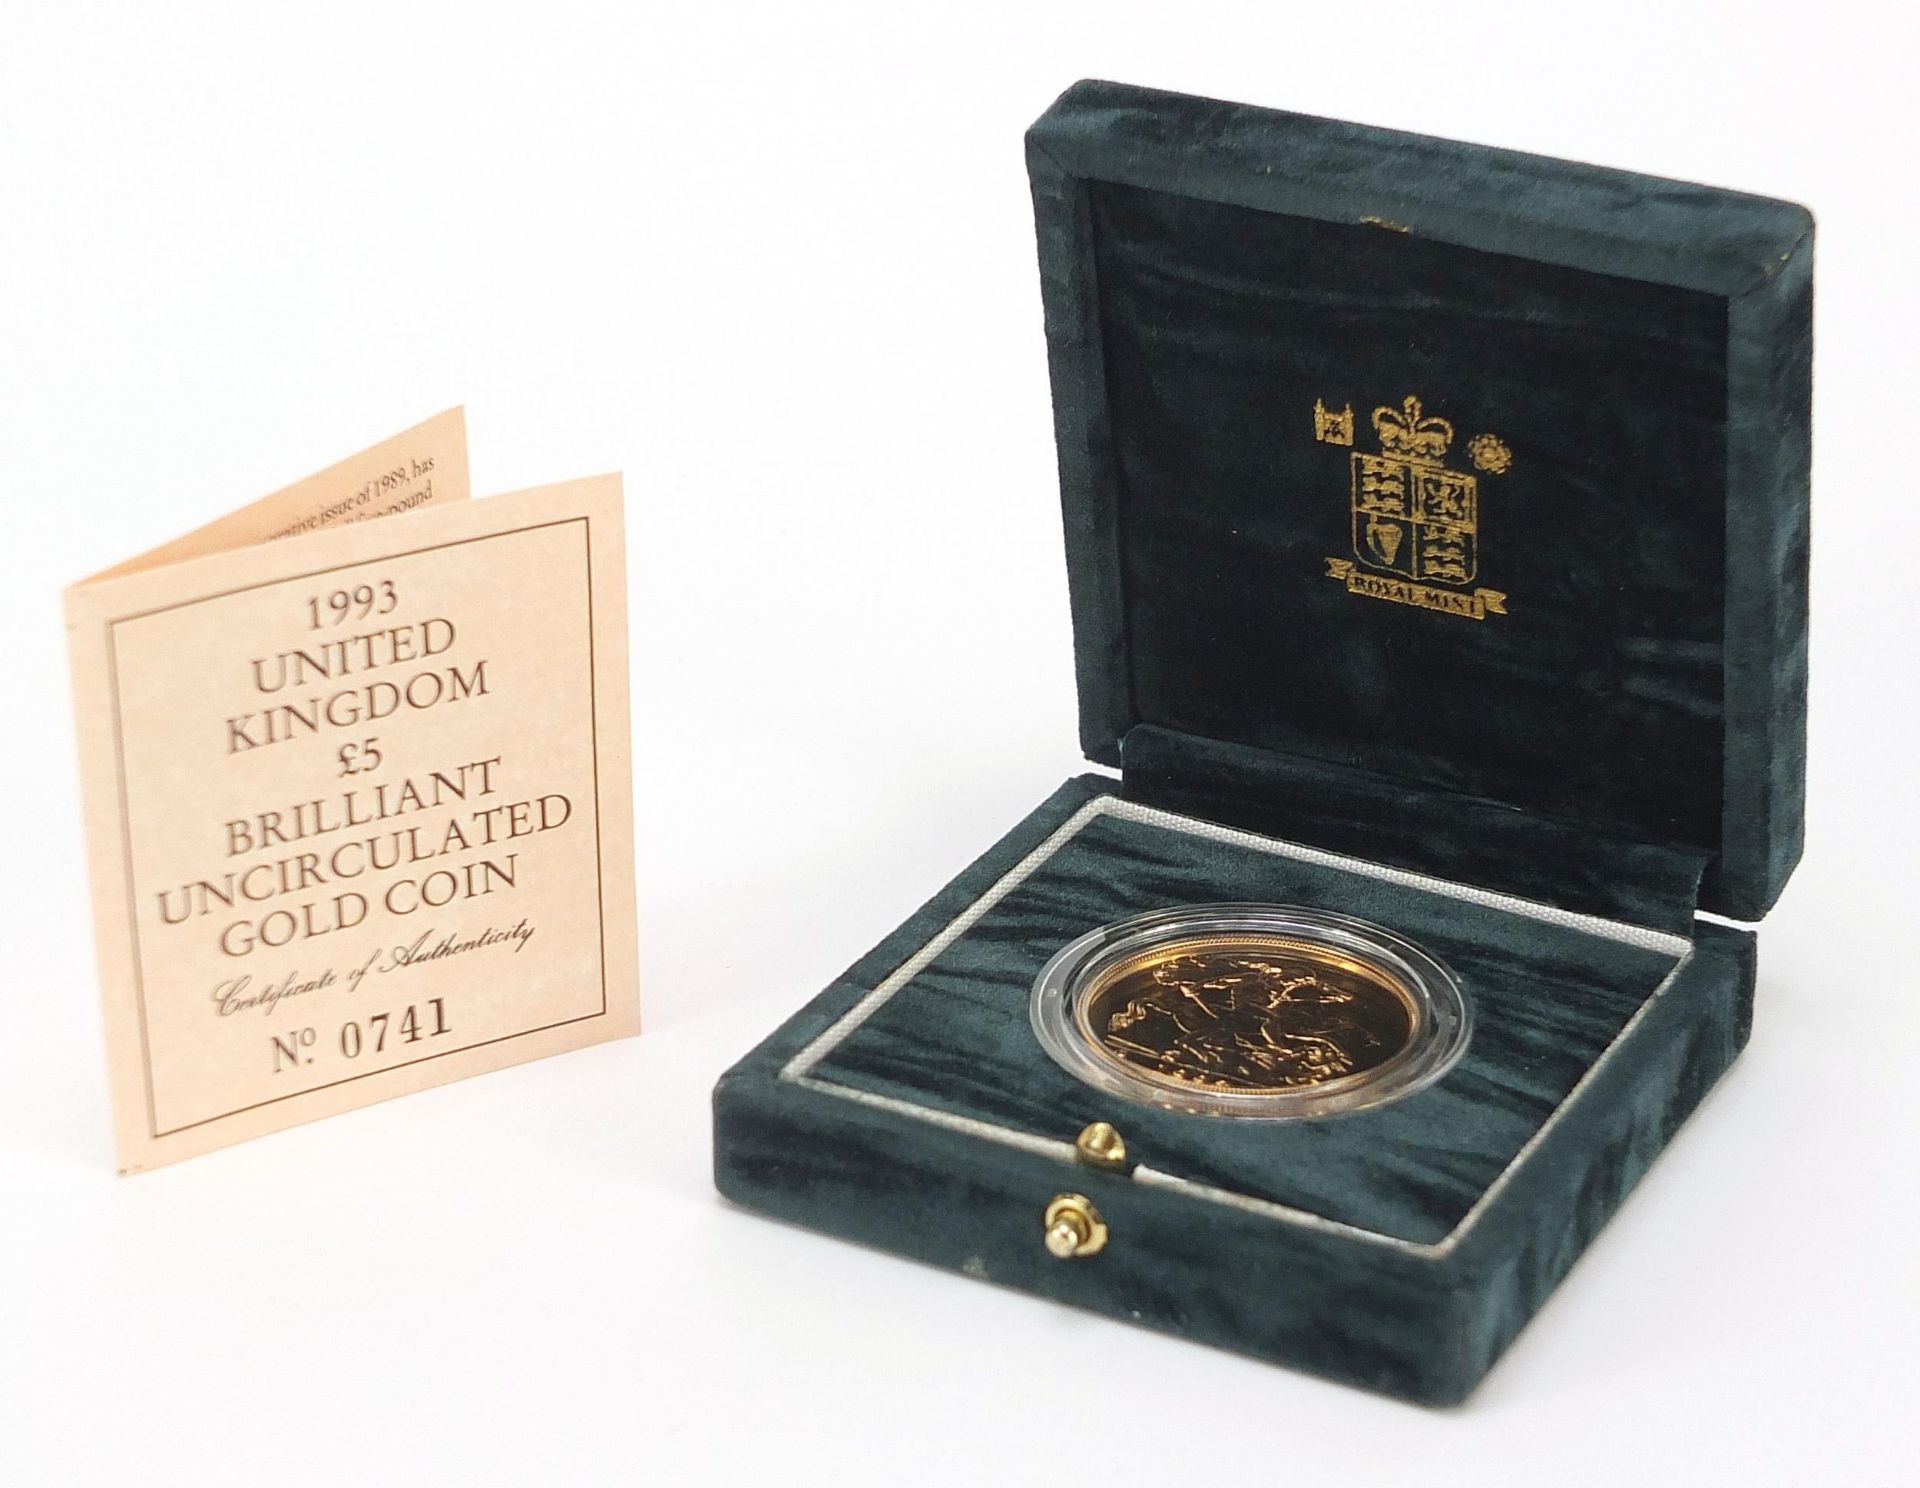 Elizabeth II 1993 uncirculated gold five pound coin with box and certificate numbered 741 - this lot - Image 3 of 6